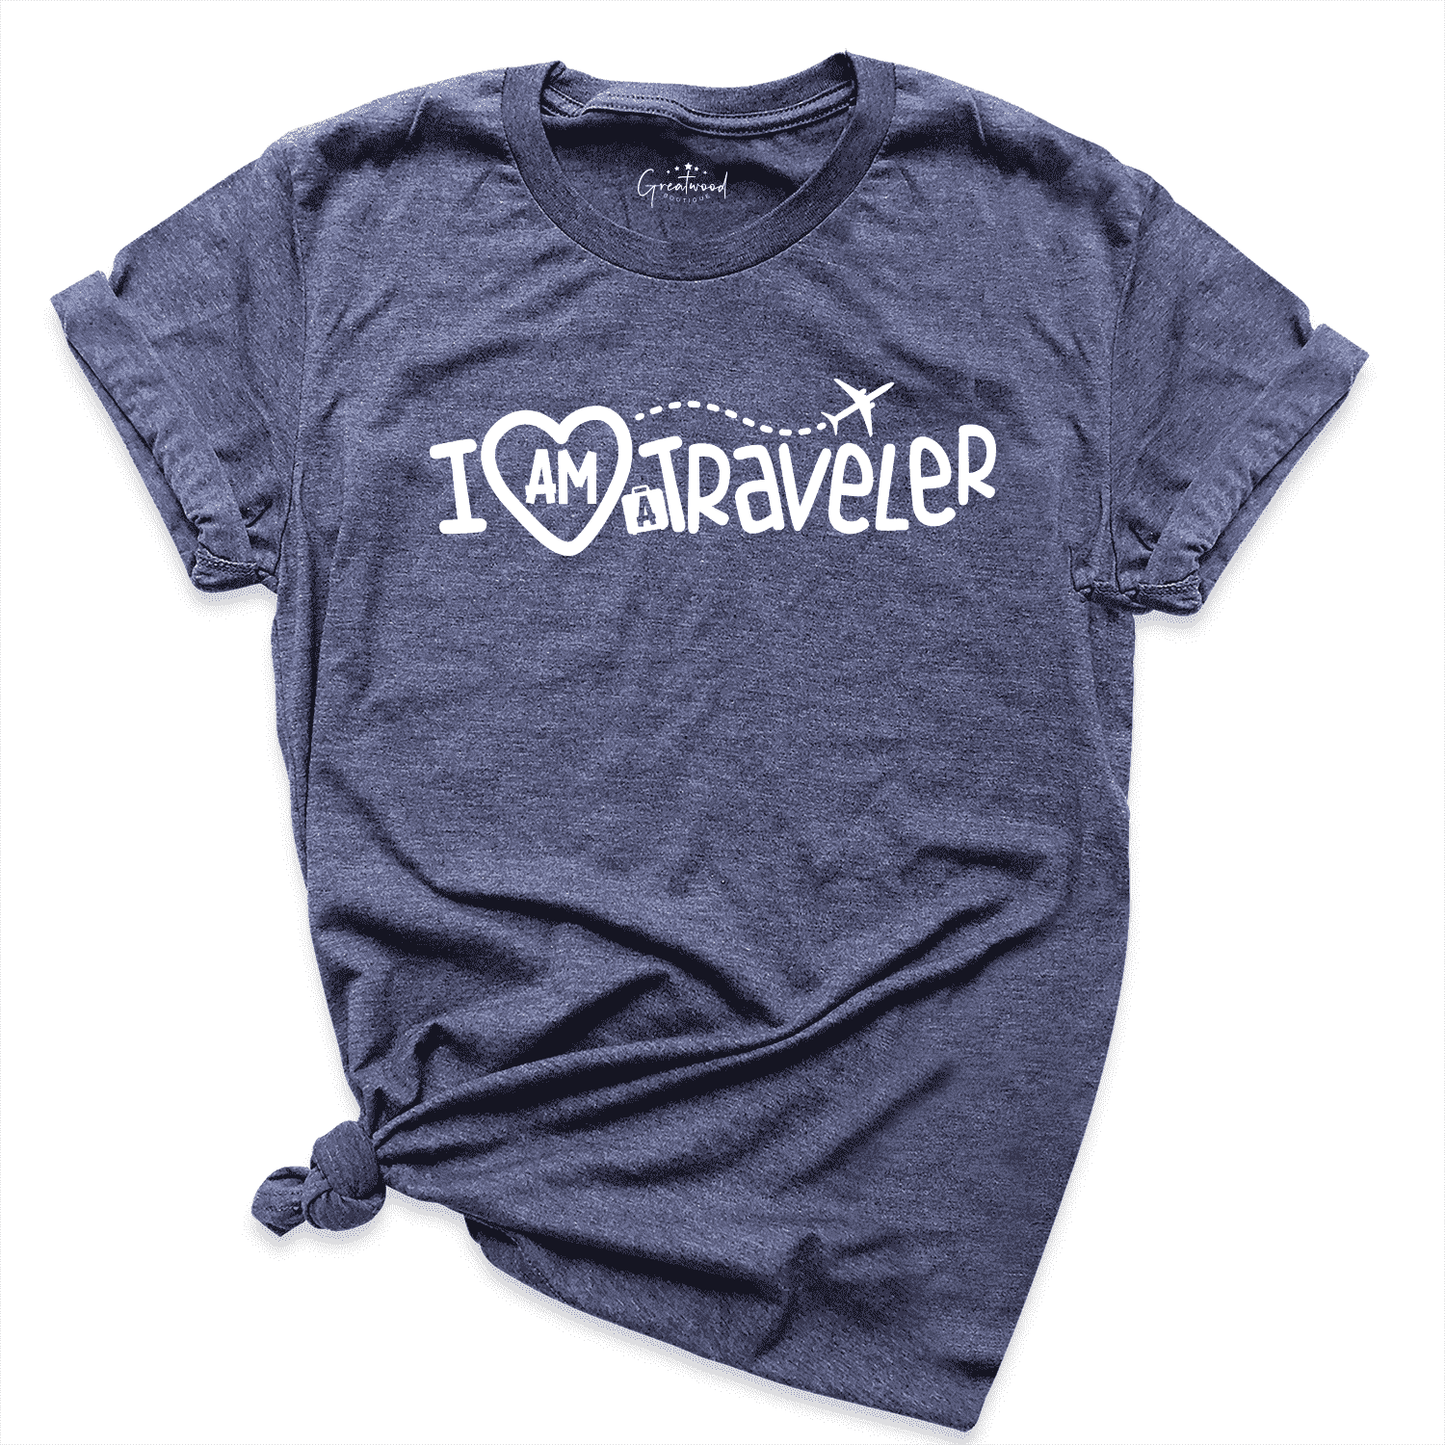 I am Traveller Shirt Navy - Greatwood Boutique